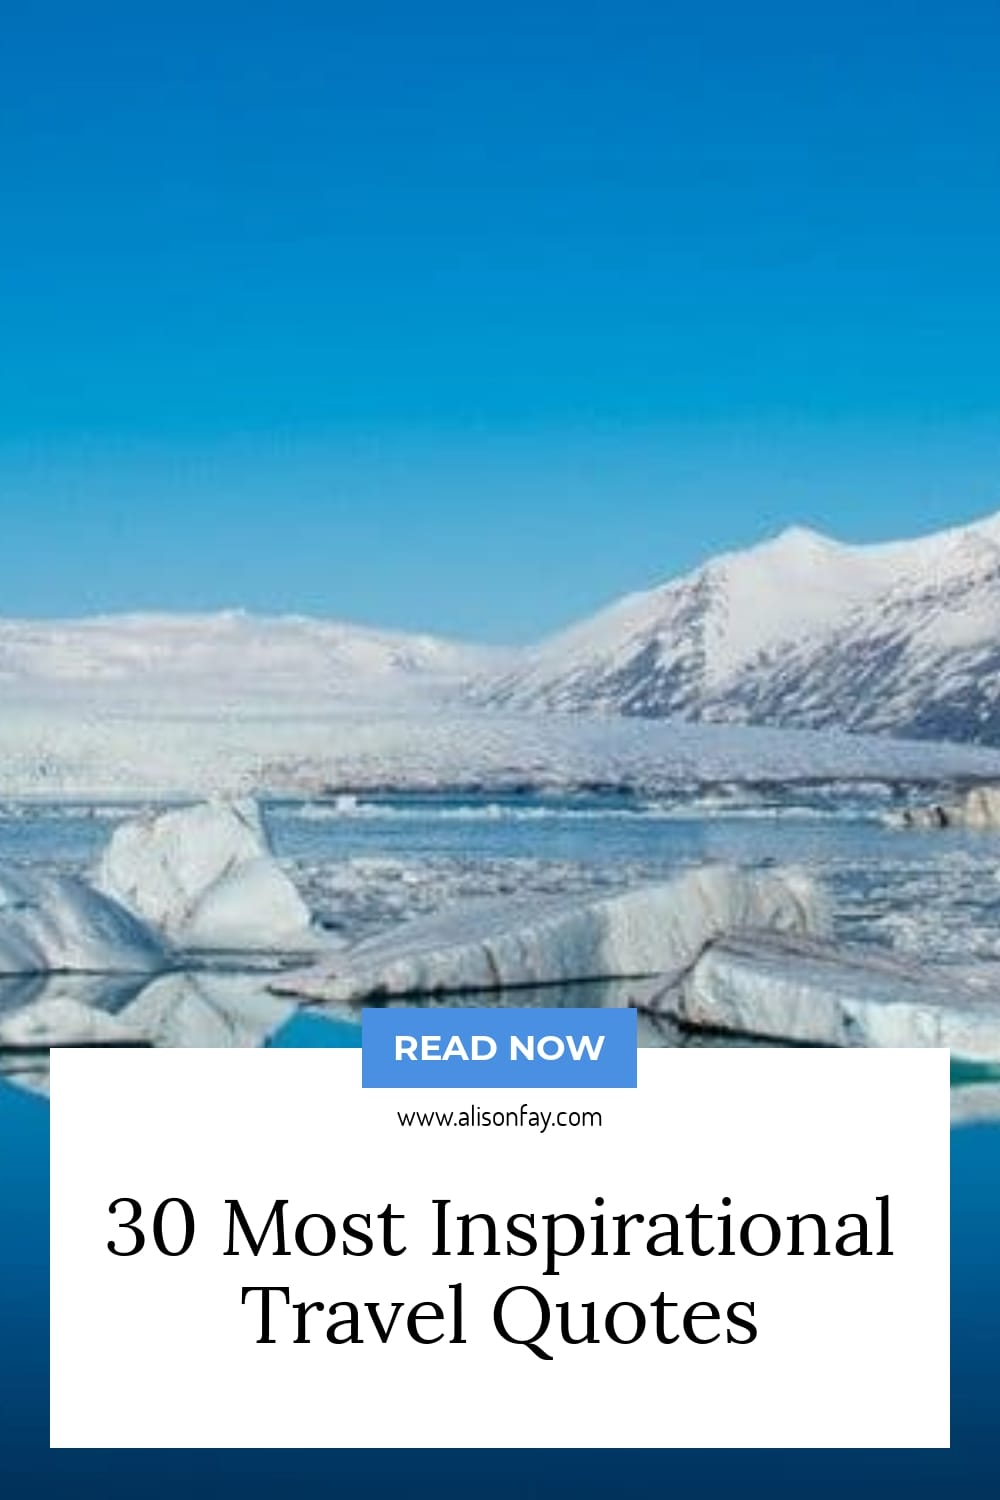 30 Most Inspirational Travel Quotes